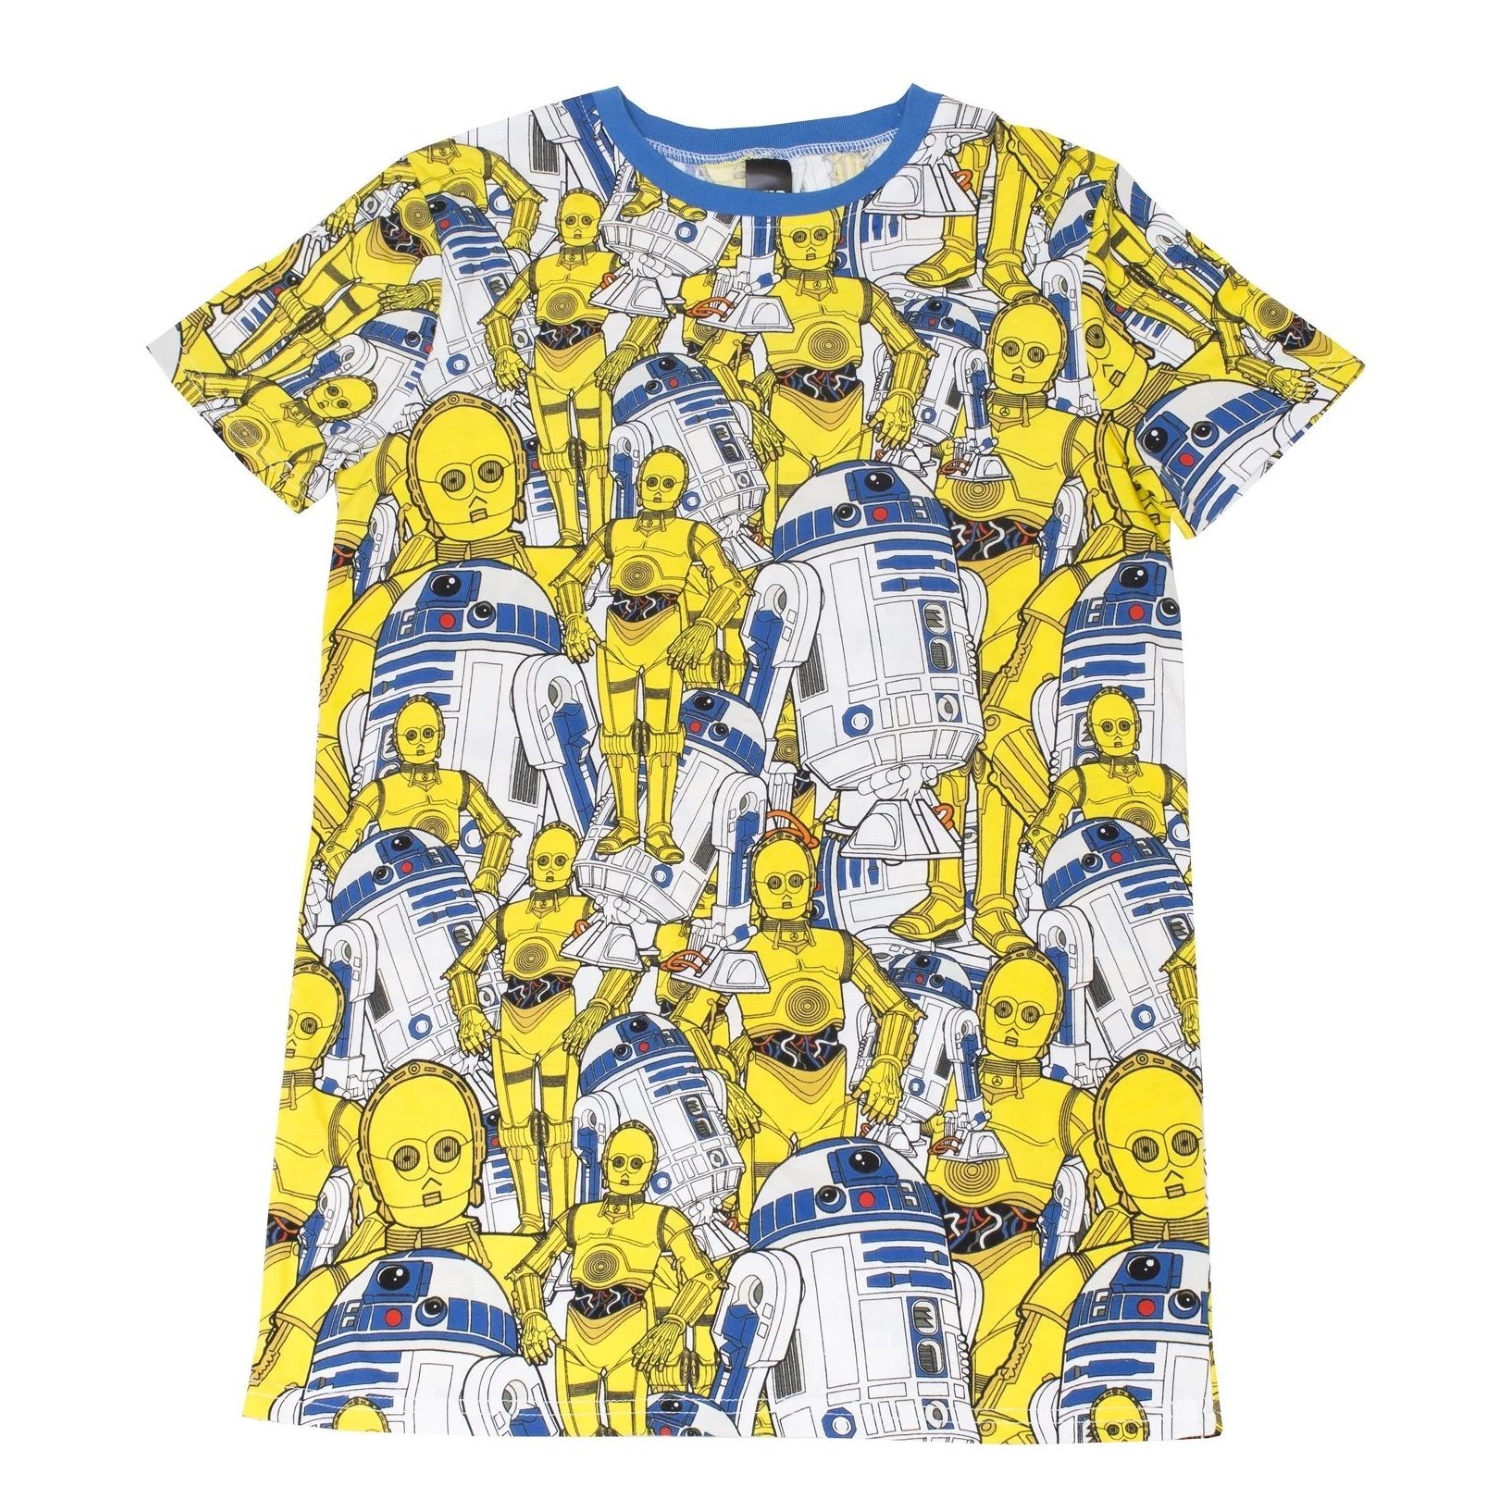 Cakeworthy x Star Wars Droids All Over Print T-Shirt